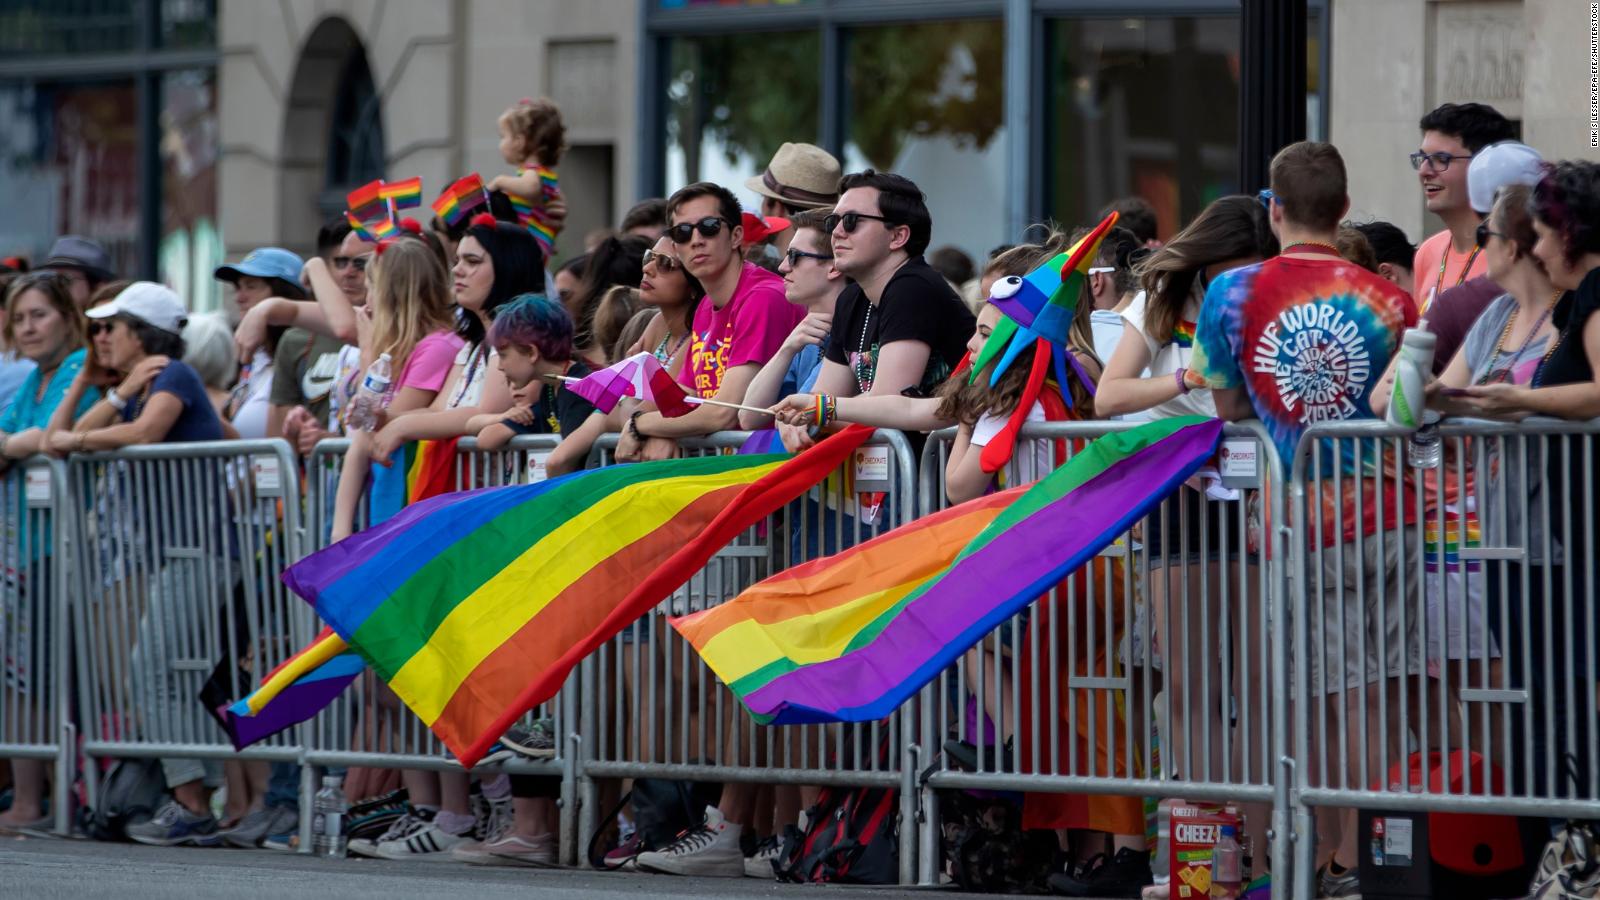 DC Pride Parade marchers injured after panic caused by noises mistaken